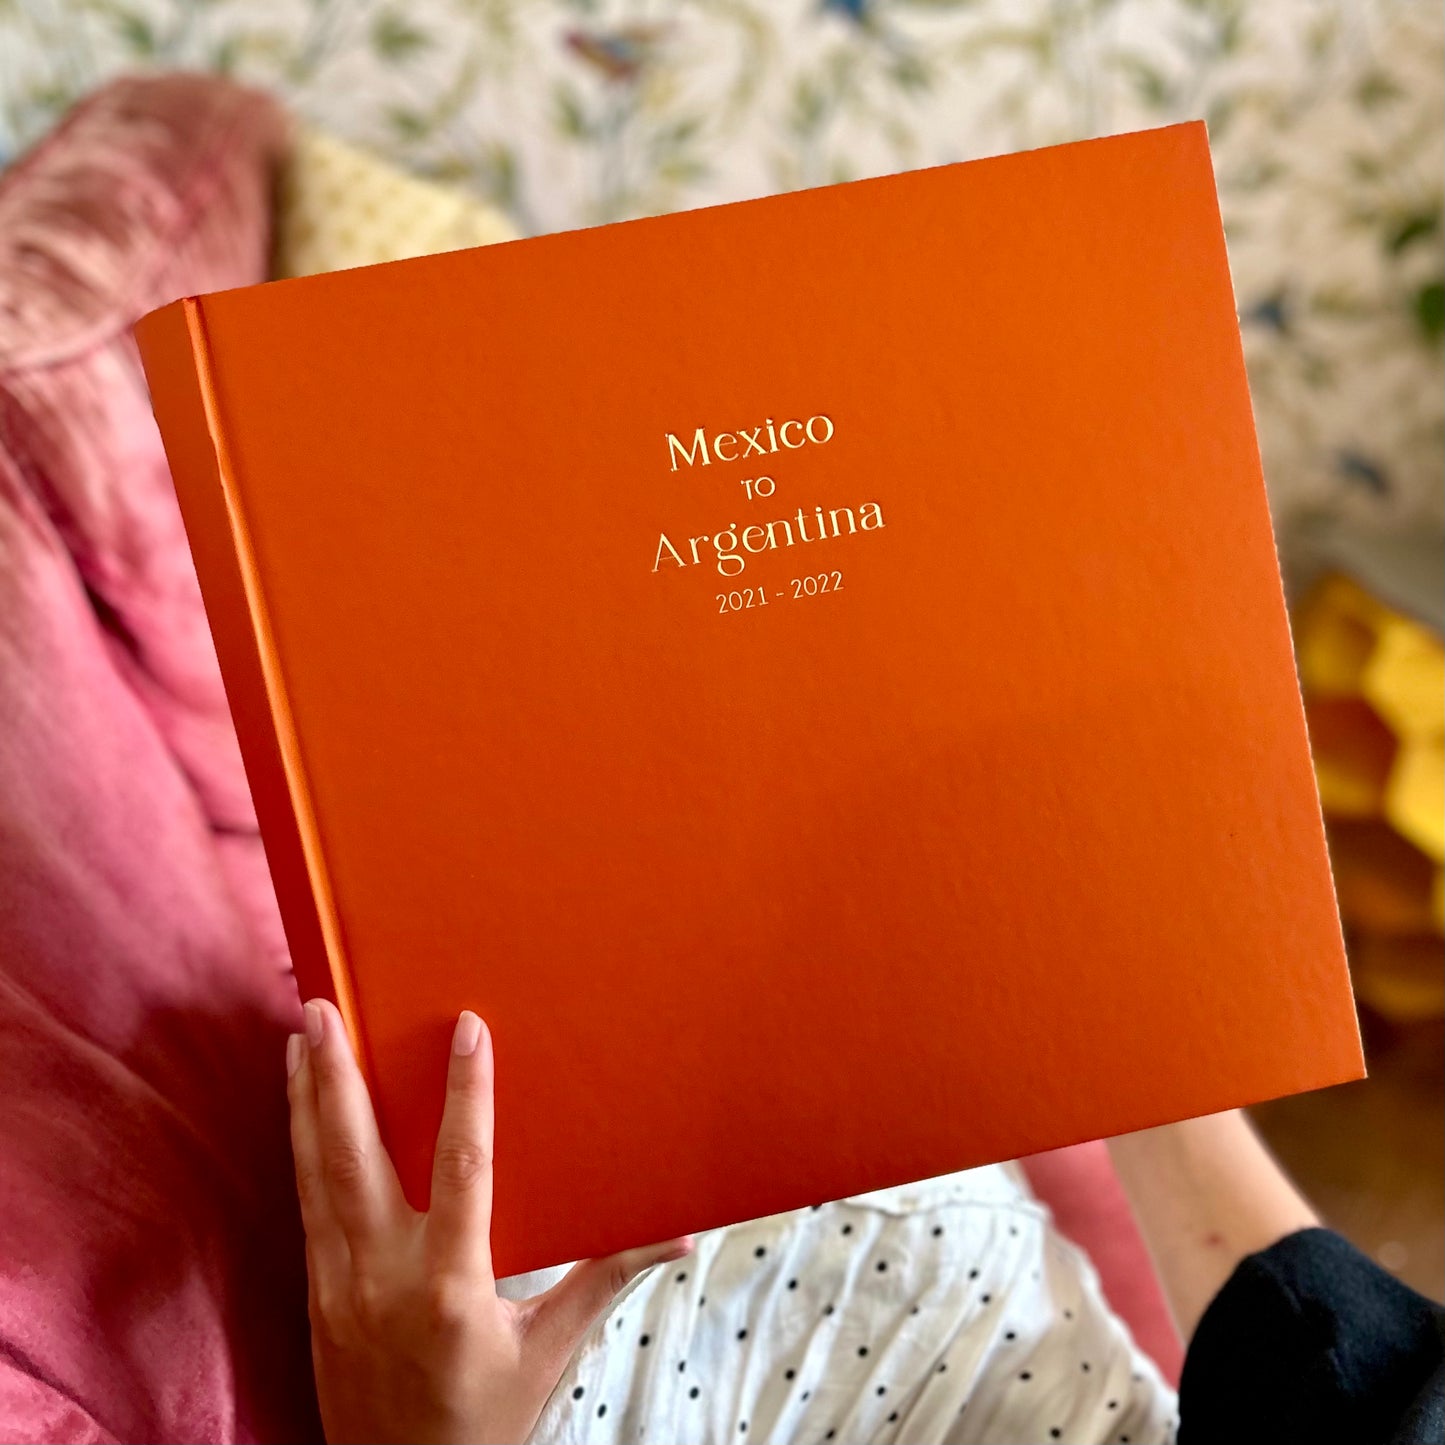 a woman is sitting on a sofa holding a large orange photo album which has been printed on the front with a holiday destination